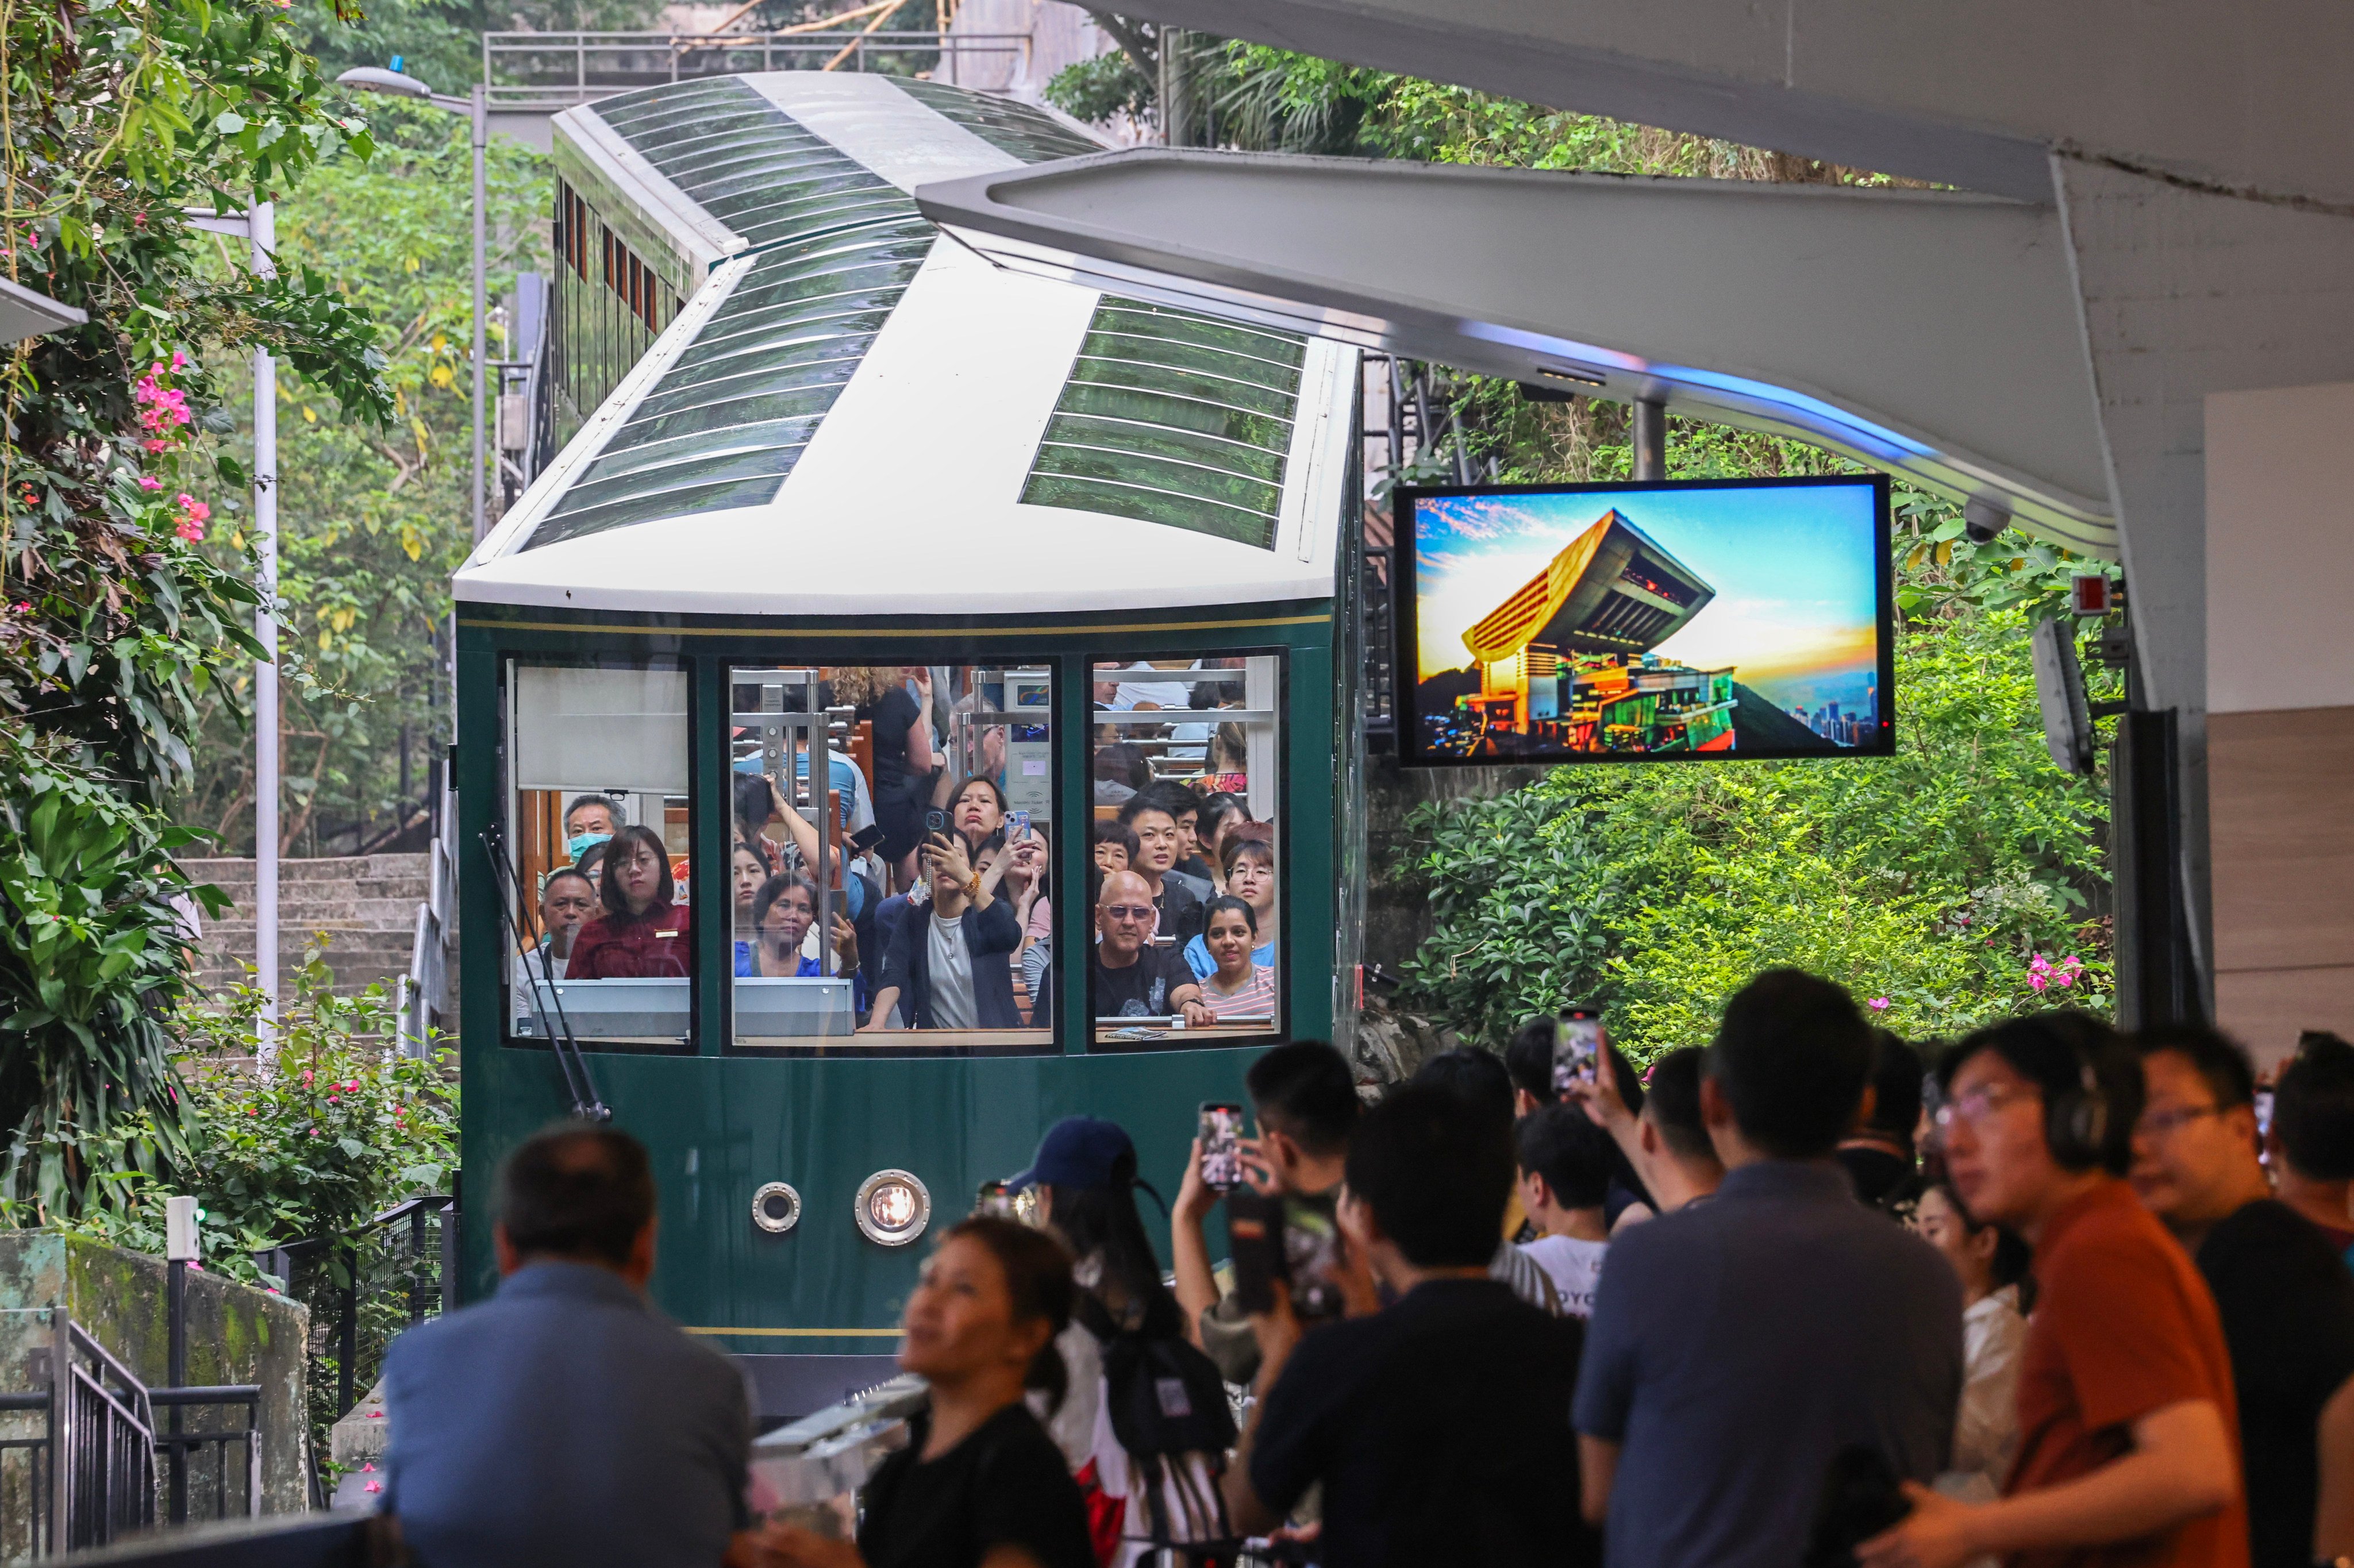 A recruitment scheme for volunteers will be expanded to new locations such as the Peak Tram terminus in Central, authorities have said. Photo: Dickson Lee